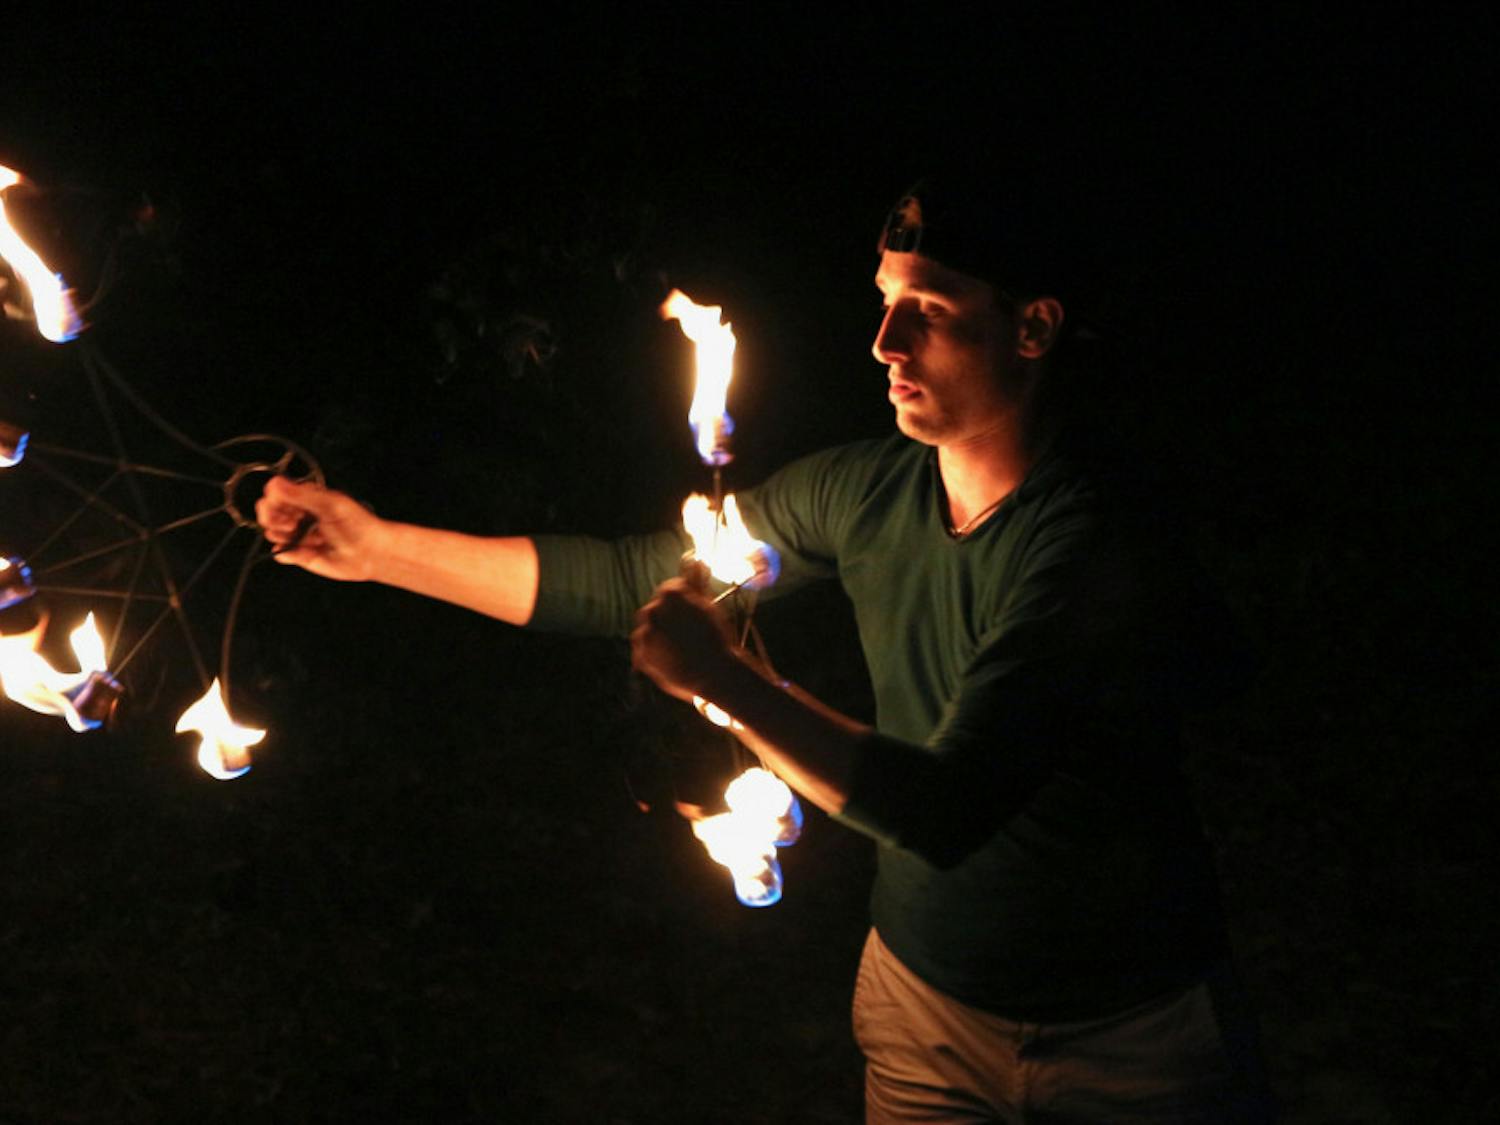 Sam Konchan, 21, UF botany junior spins a set of fire fans in the backyard area of Flow Space located on 117 NW 16th Ave. Spinning fire is only one form of the flow arts in which Konchan also finds a community offering lifelong friendships.